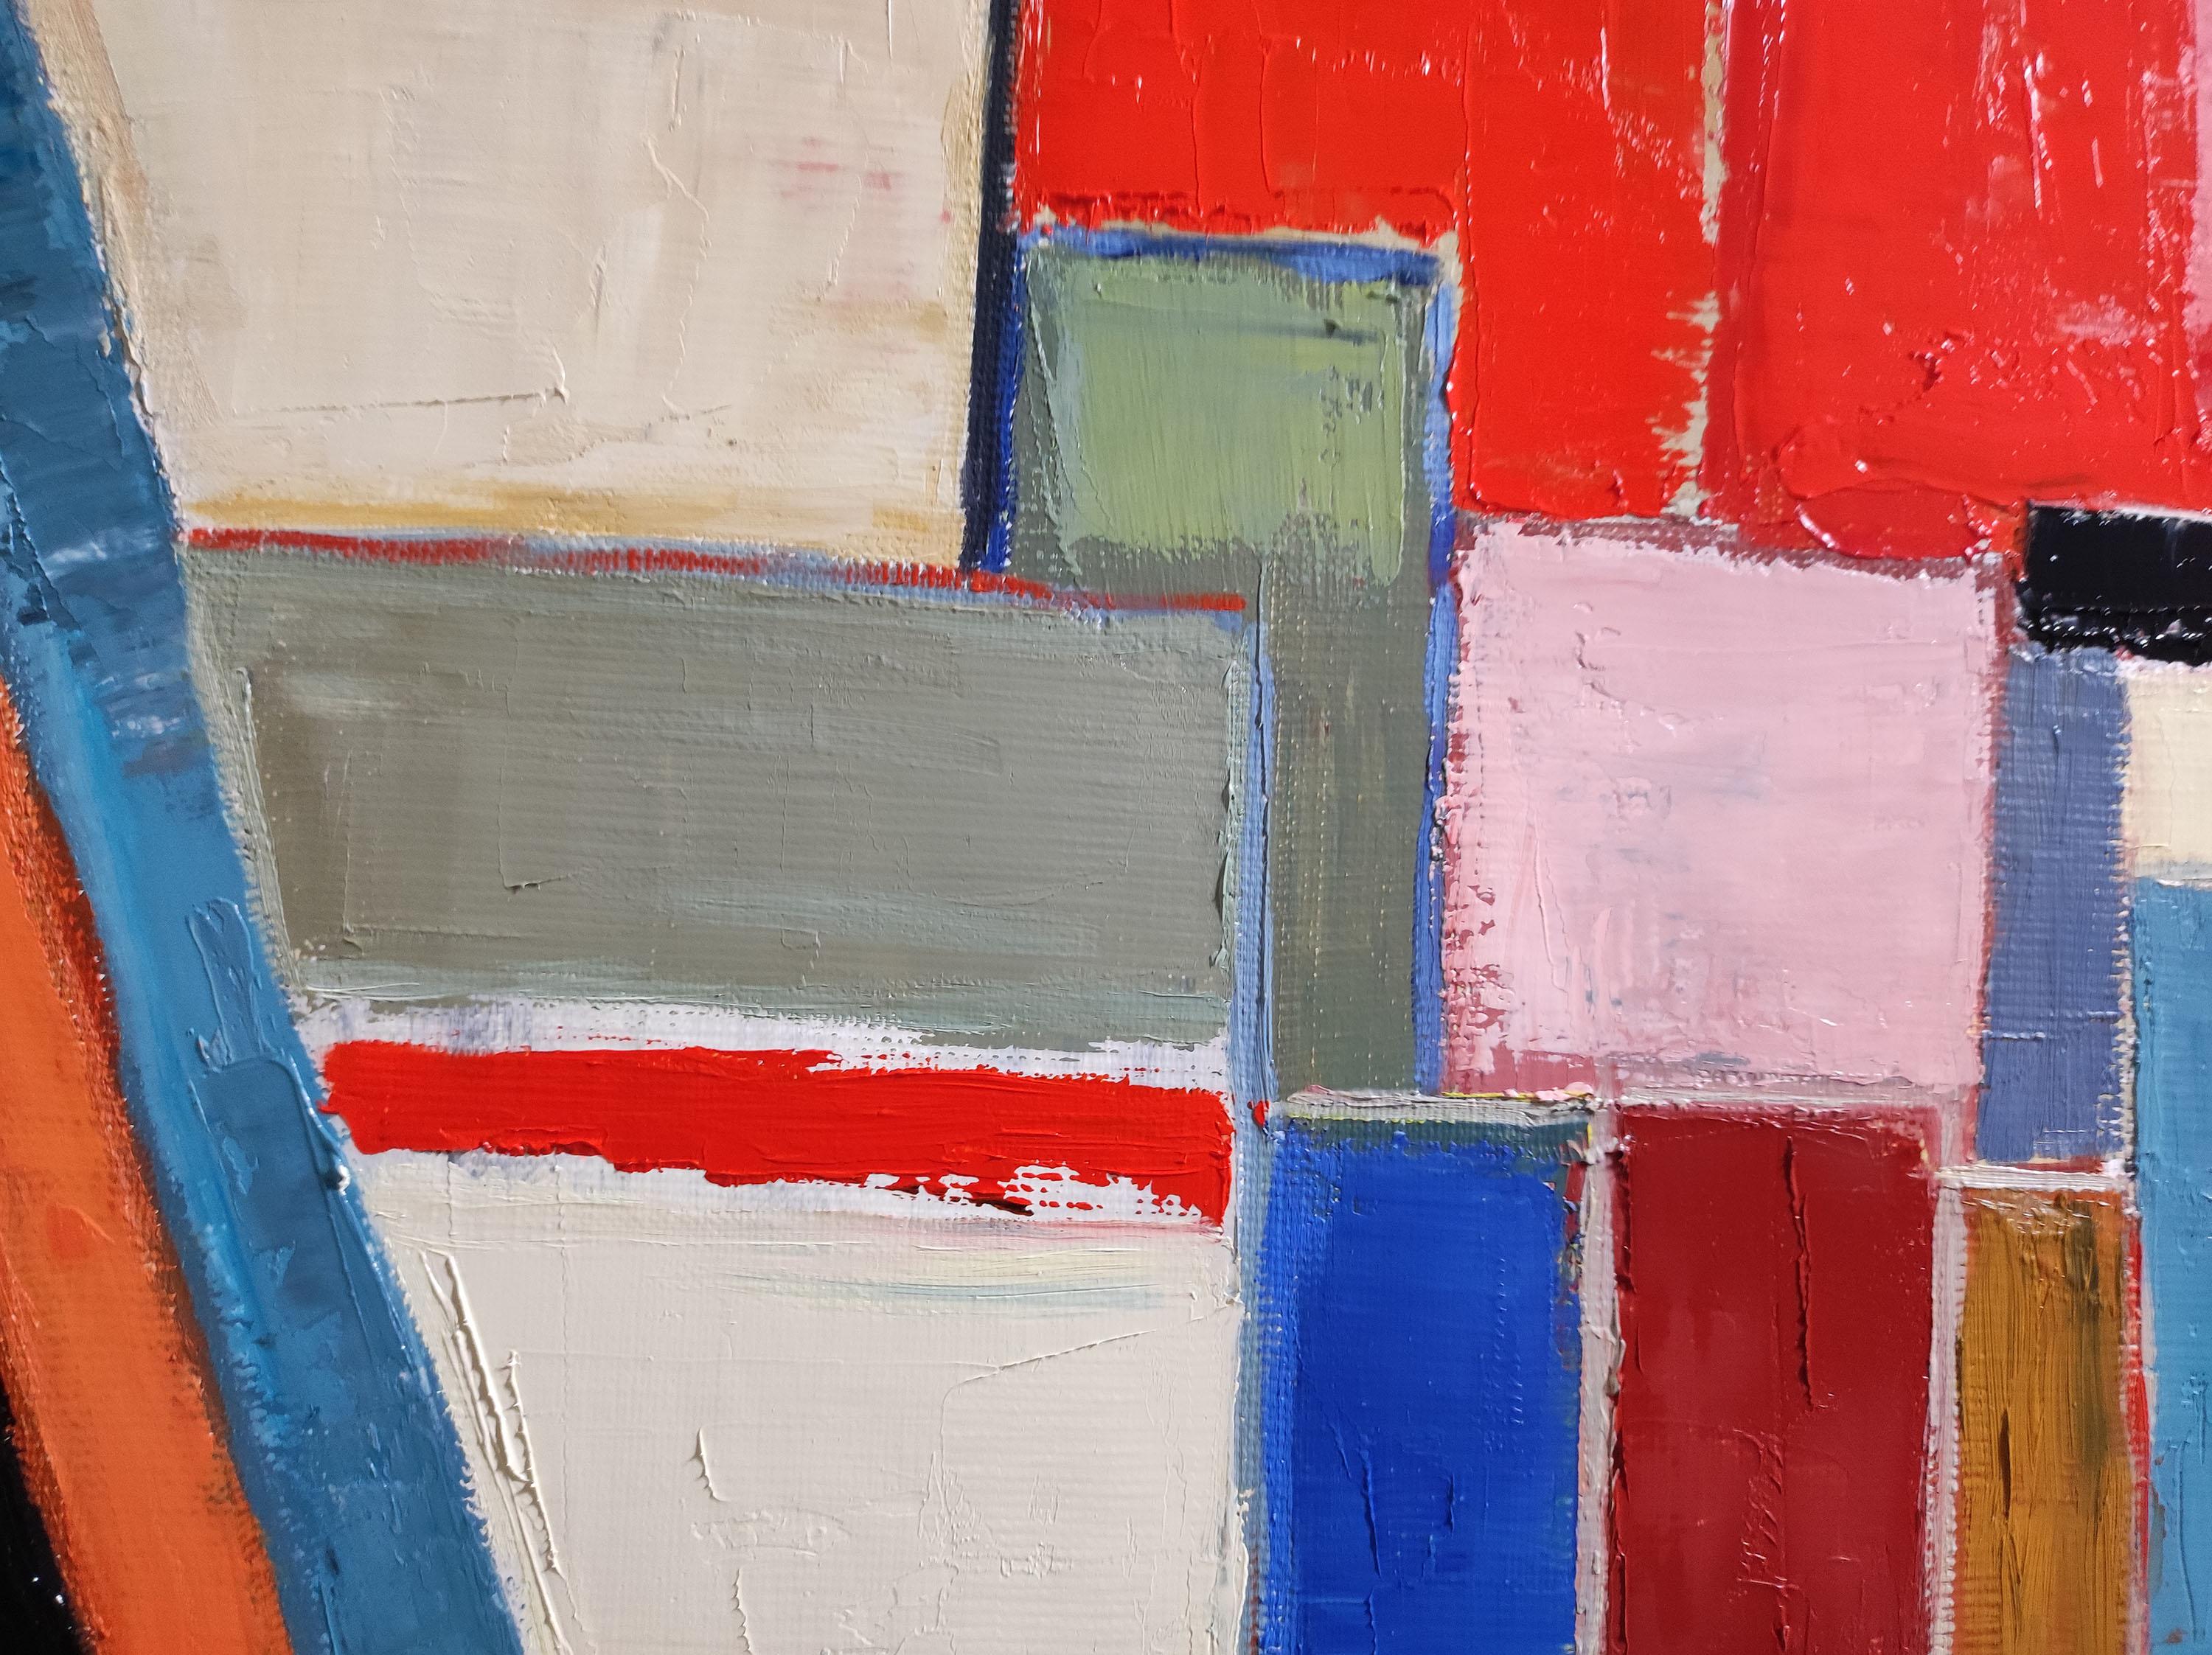 Sophie DUMONT's abstract is not a concept, it is an approach where each canvas is built around graphics put into perspective by color.

Painting of a red artist's studio where the canvases are placed pell-mell plunging us into the world of Sophie